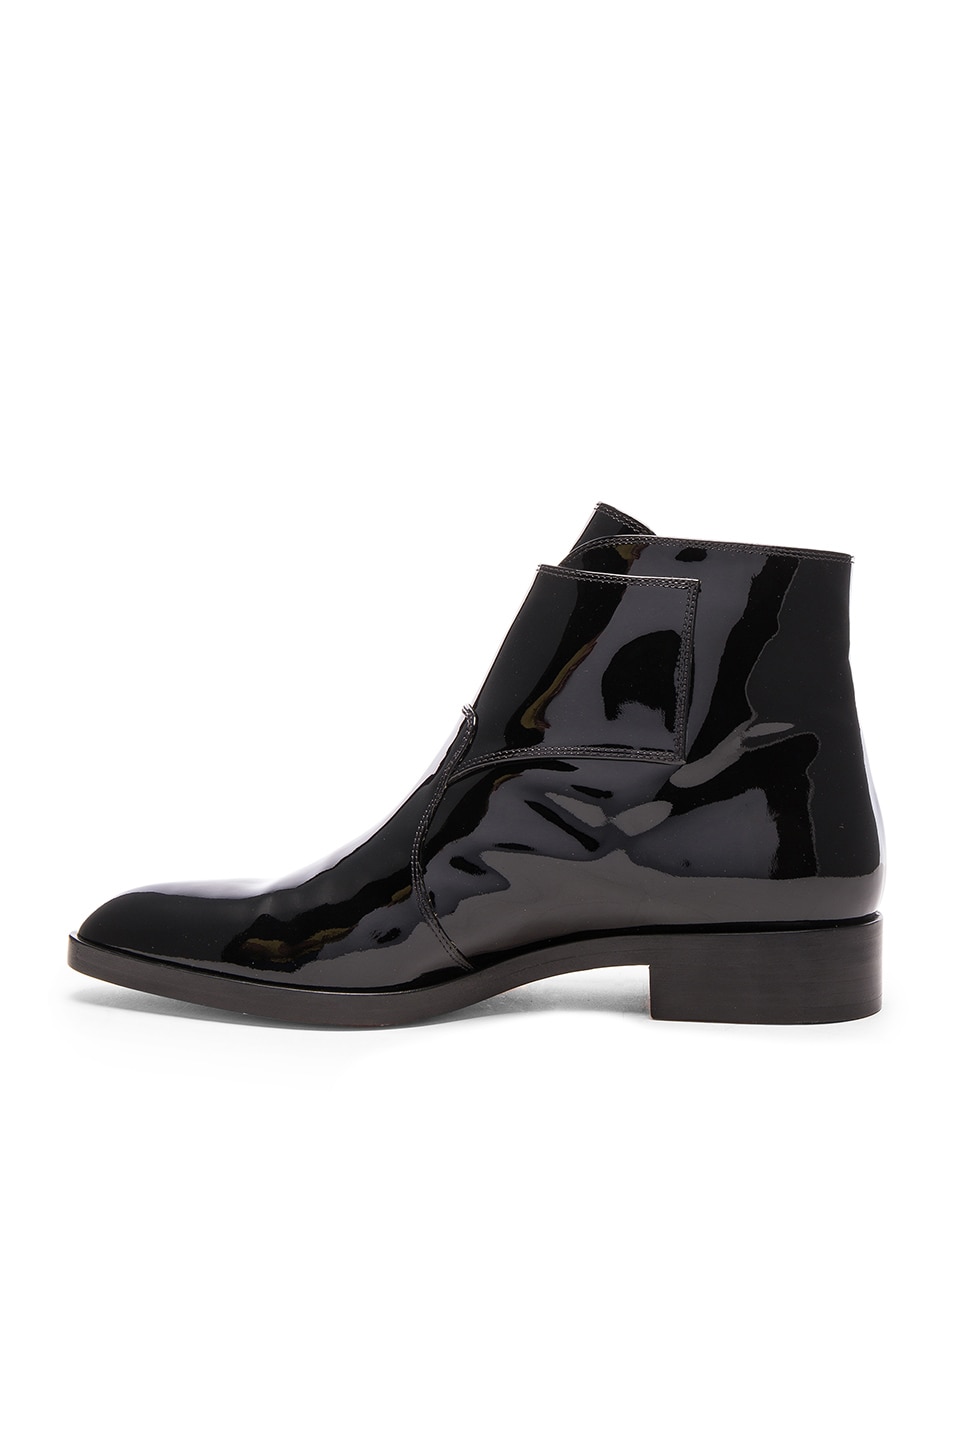 2 Stores In Stock: GIANVITO ROSSI Flat Patent Leather Ankle Boot, Black